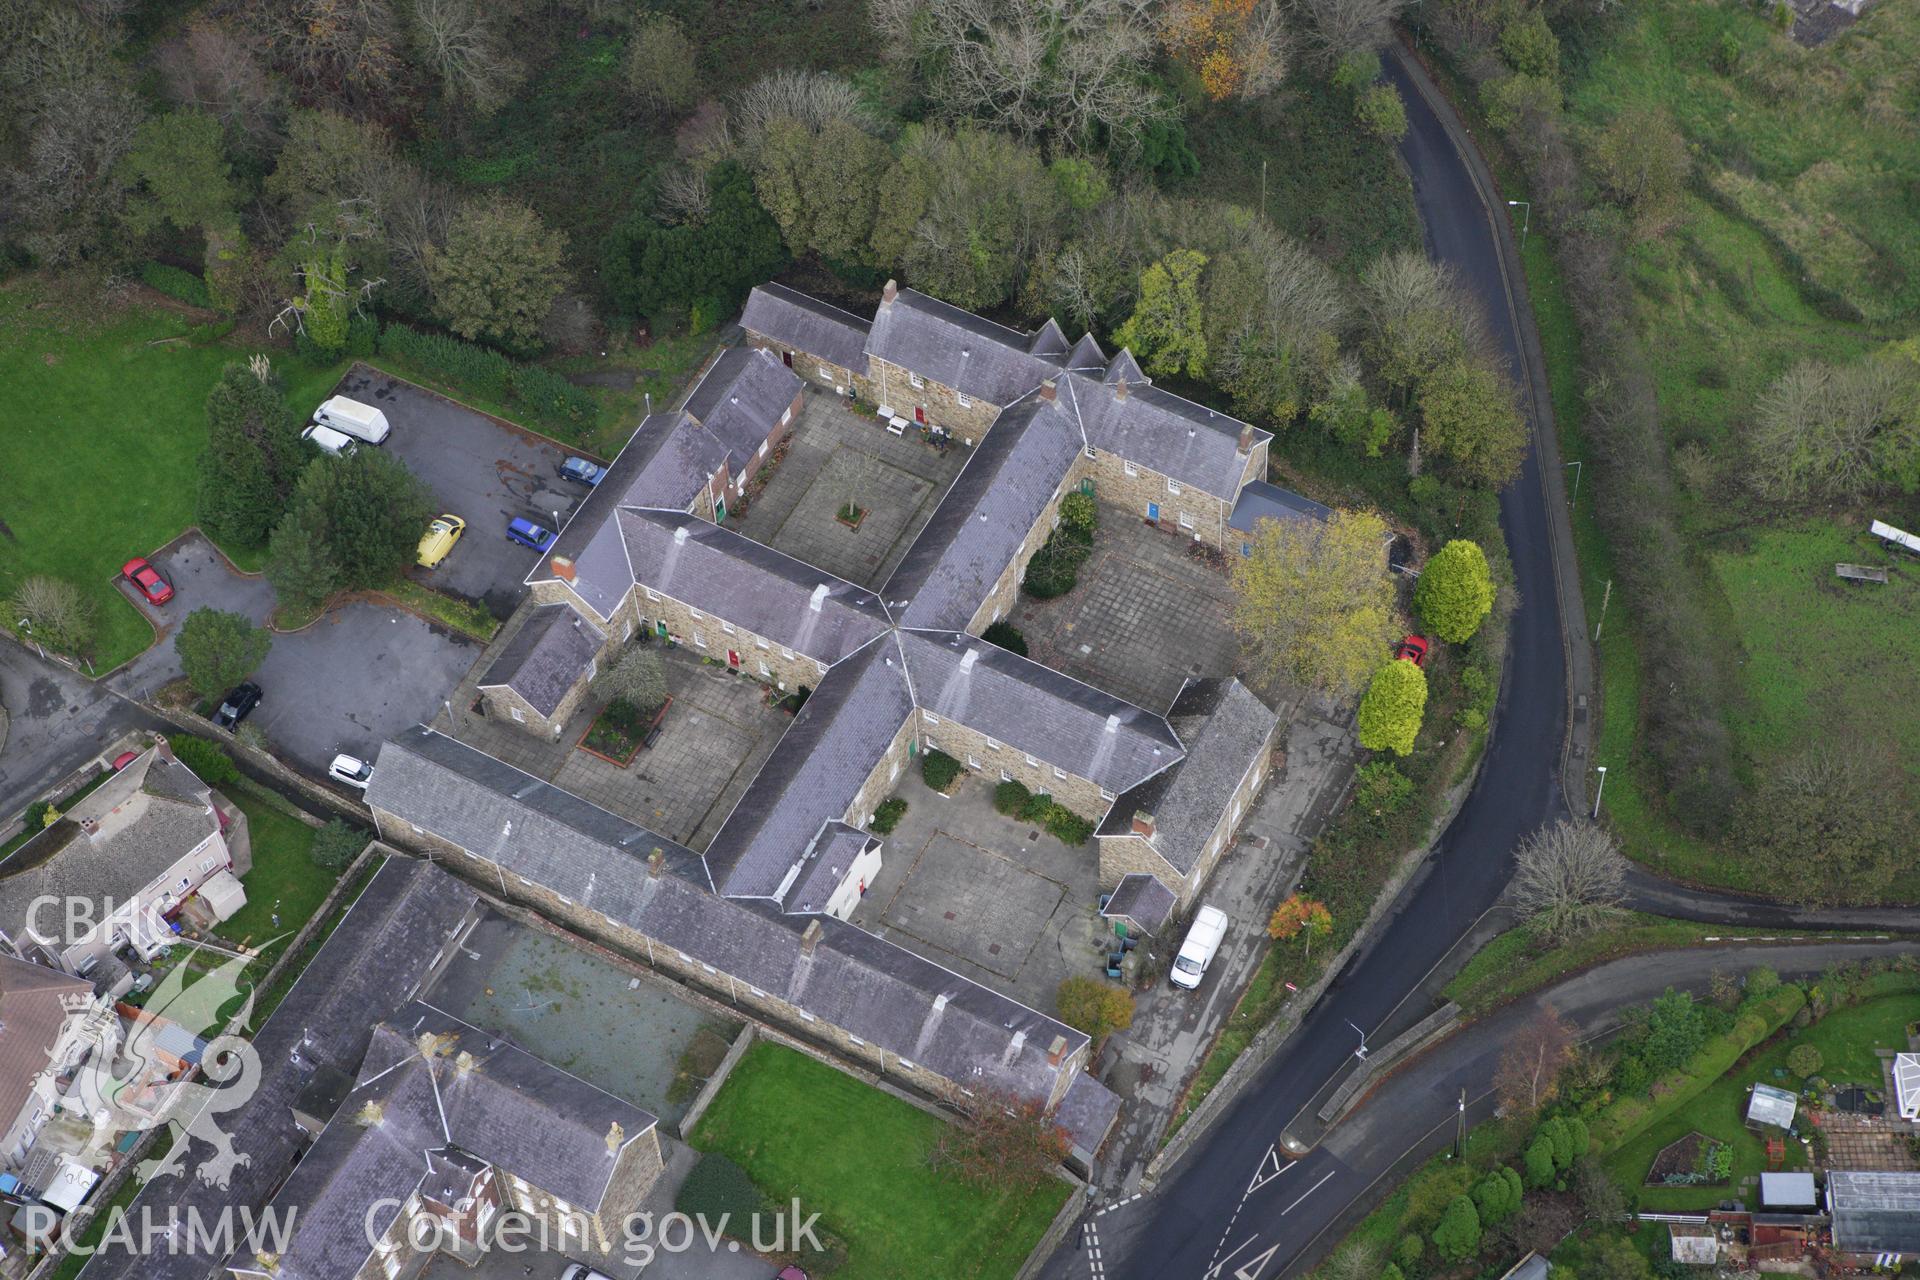 RCAHMW colour oblique aerial photograph of St Thomas' Hospital. Taken on 09 November 2009 by Toby Driver